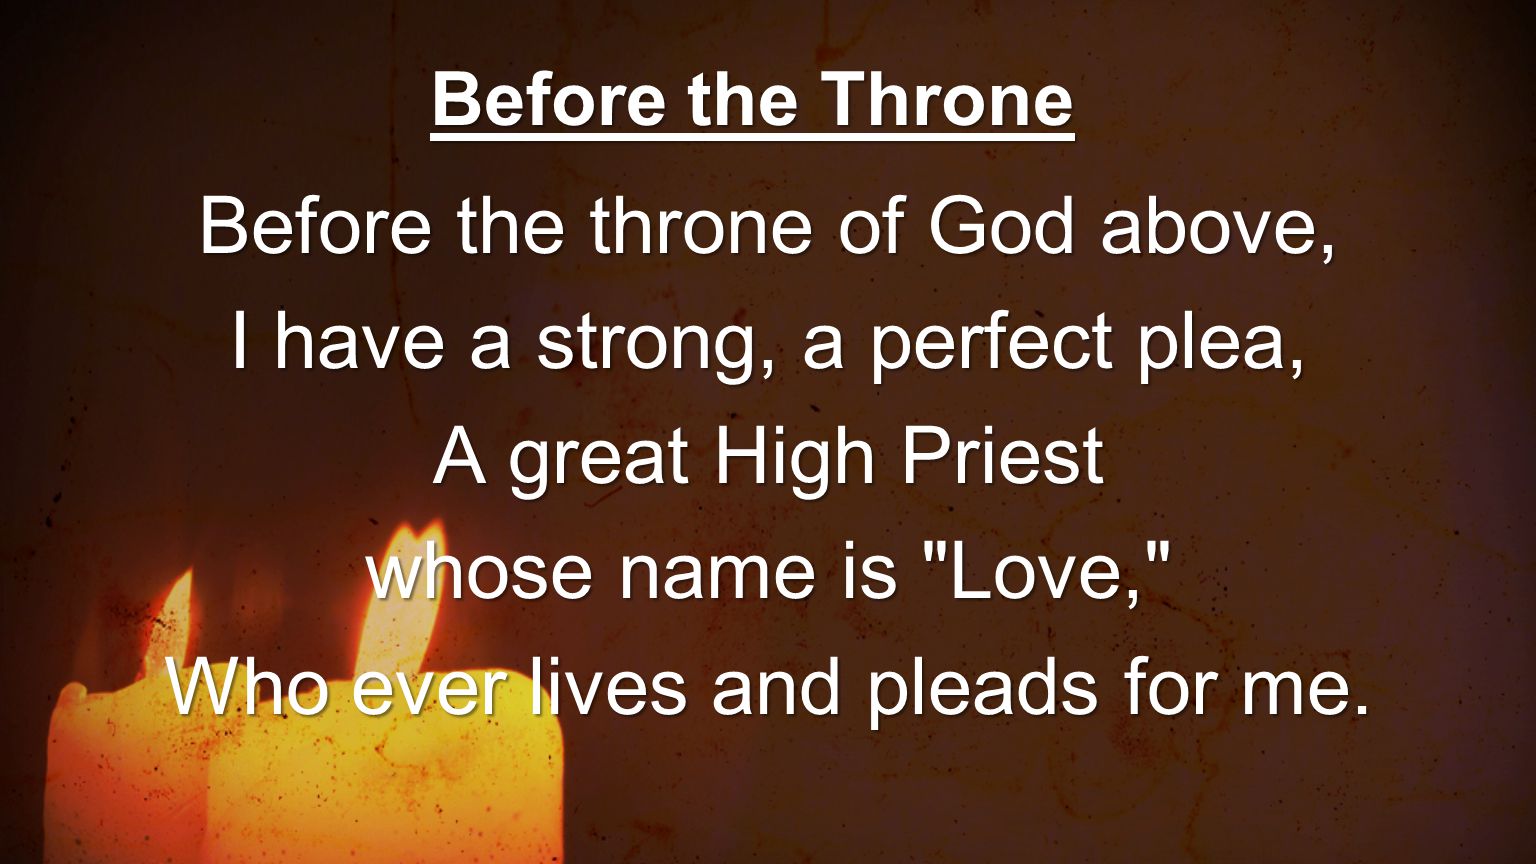 Before the throne of God above, I have a strong, a perfect plea,